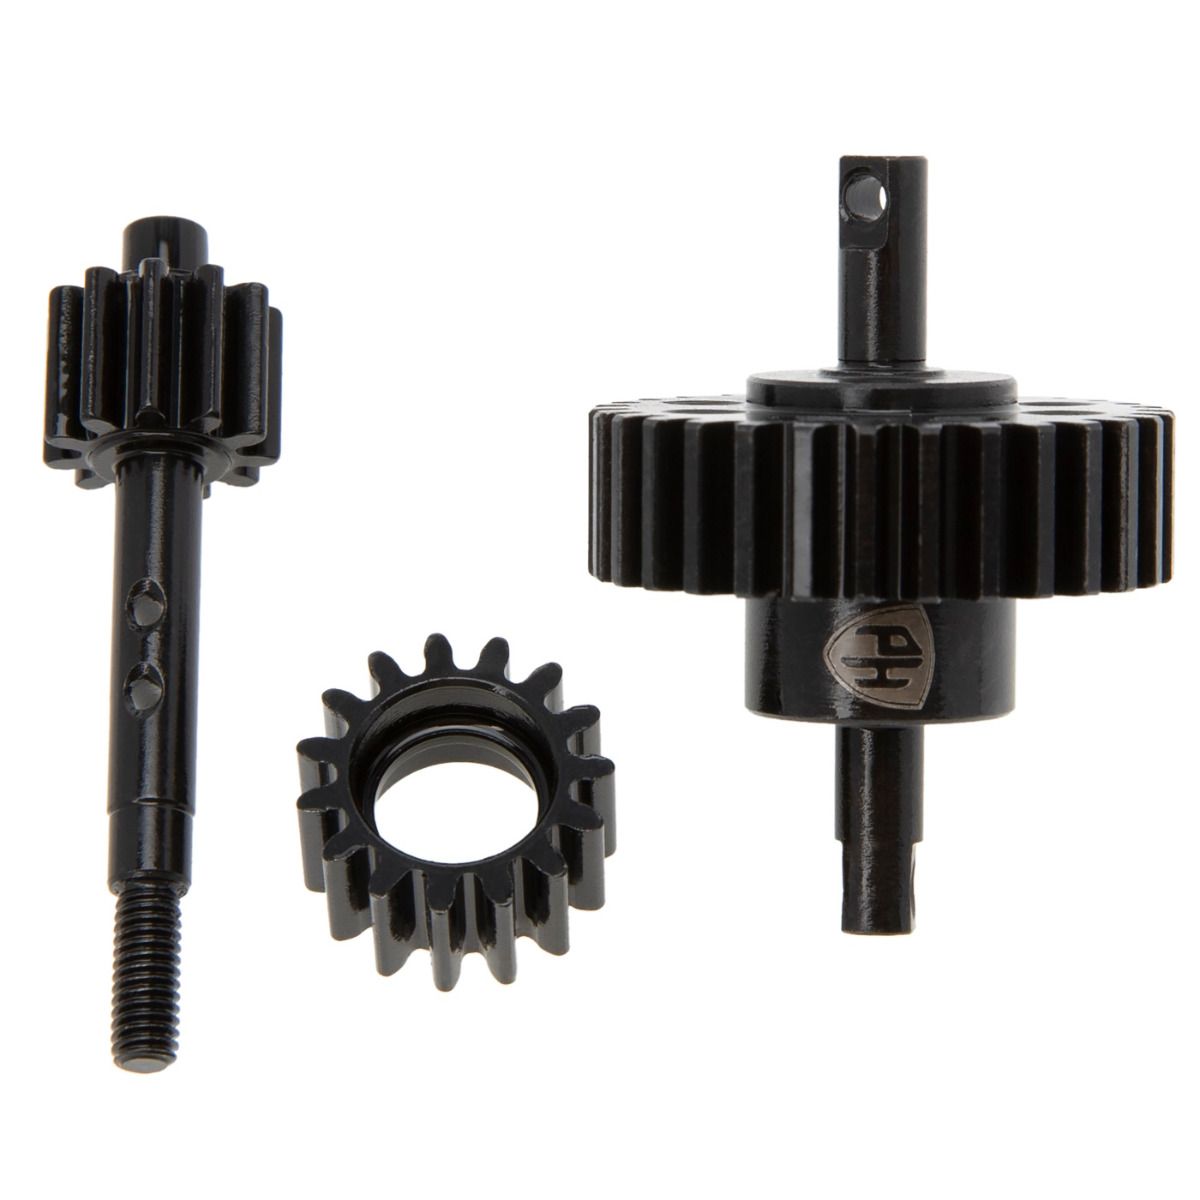 Power Hobby Transmission Gears For Traxxas 272R Transmission